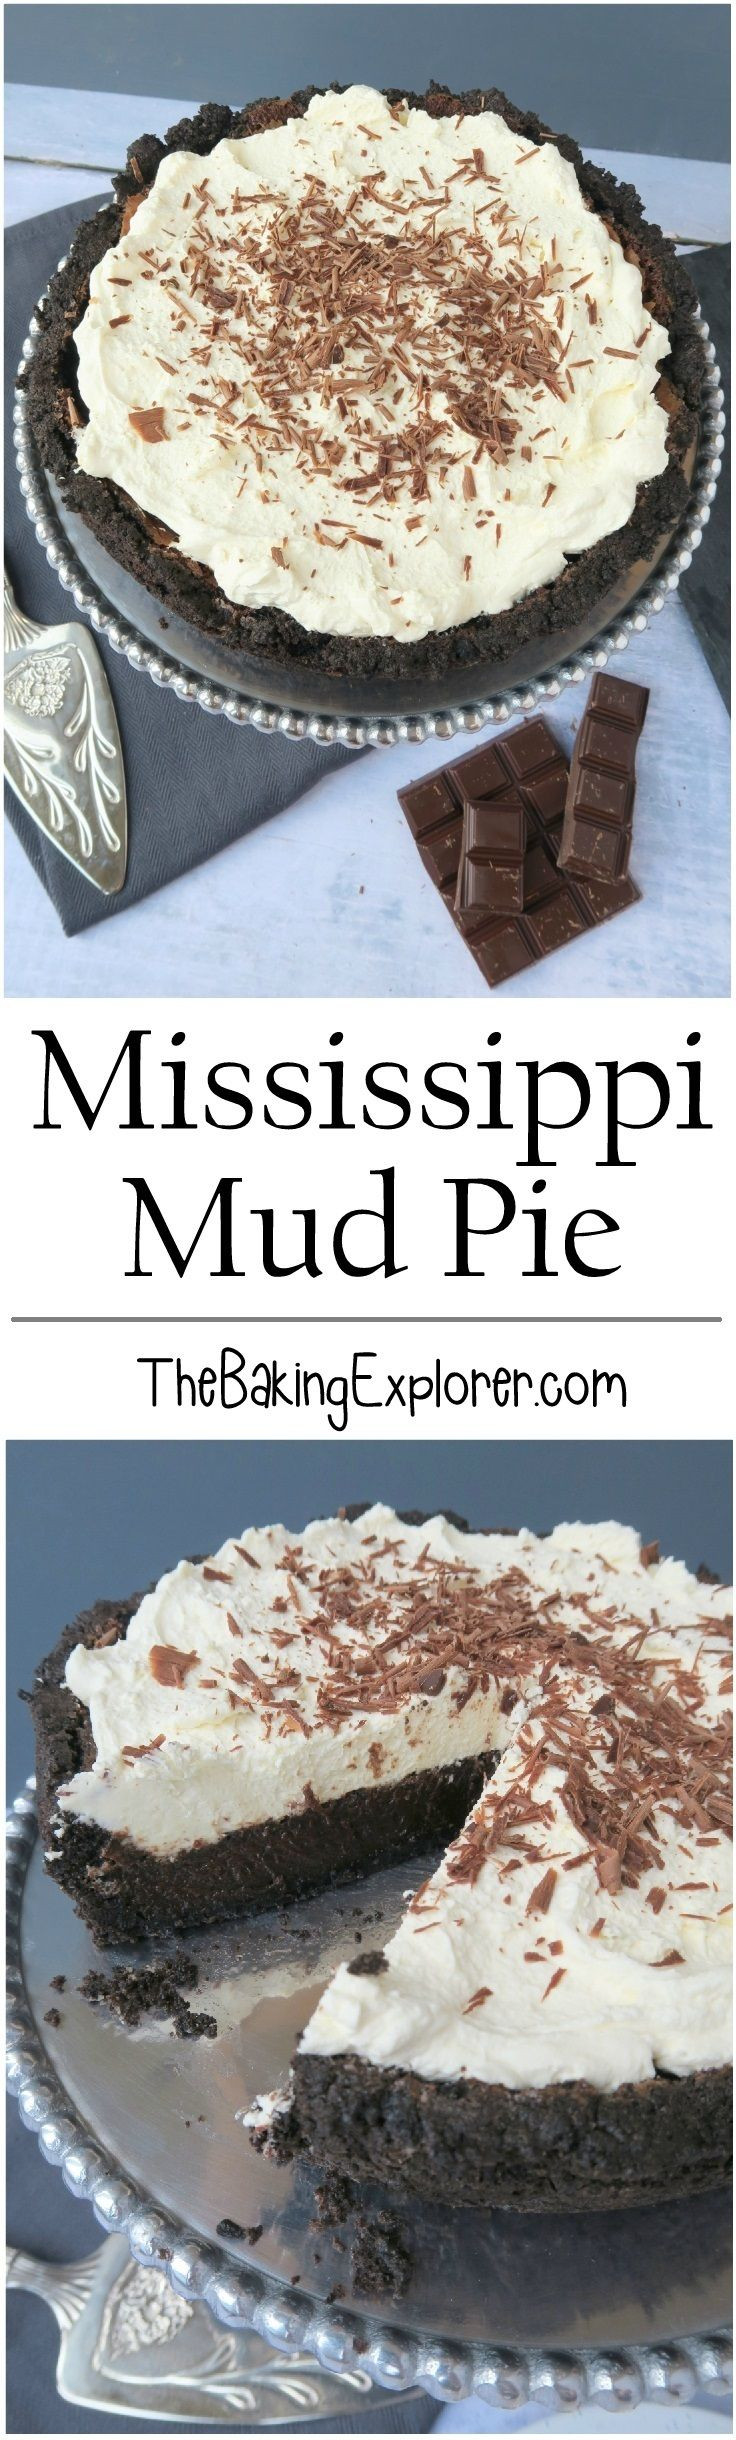 Dinner Party Desserts To Make Ahead
 Mississippi Mud Pie Recipe